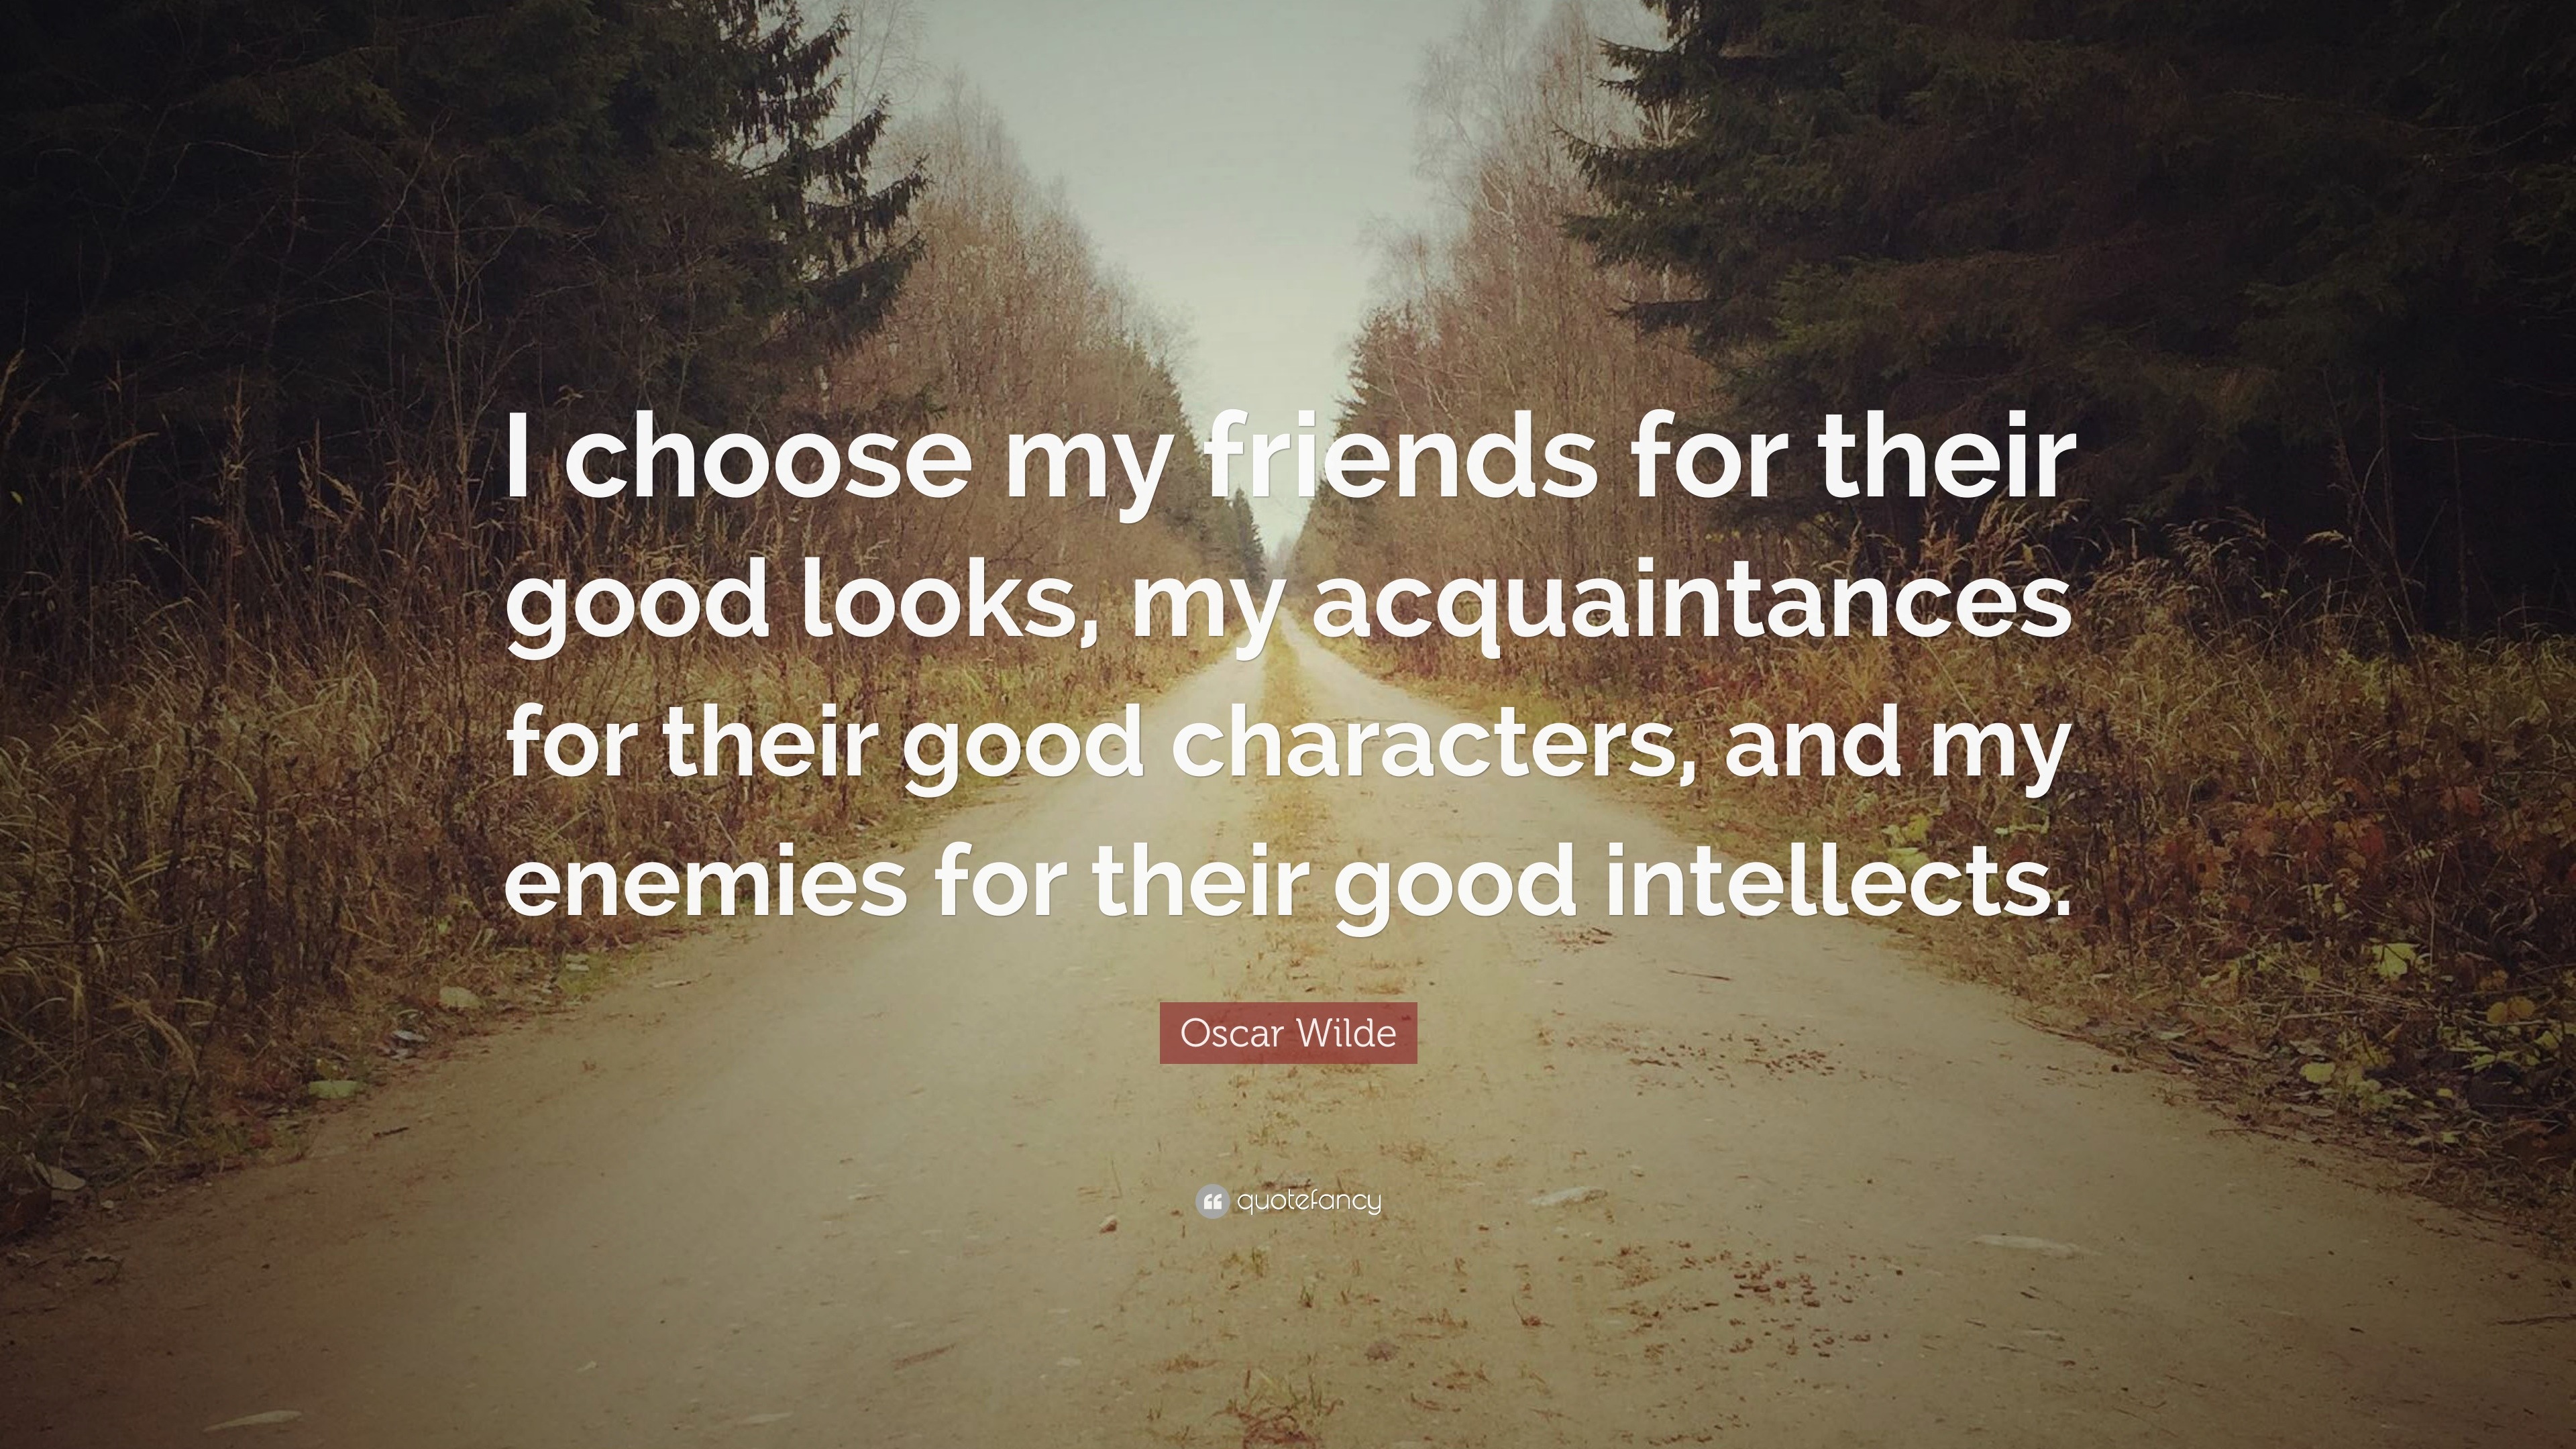 Oscar Wilde Quote: “I choose my friends for their good looks, my